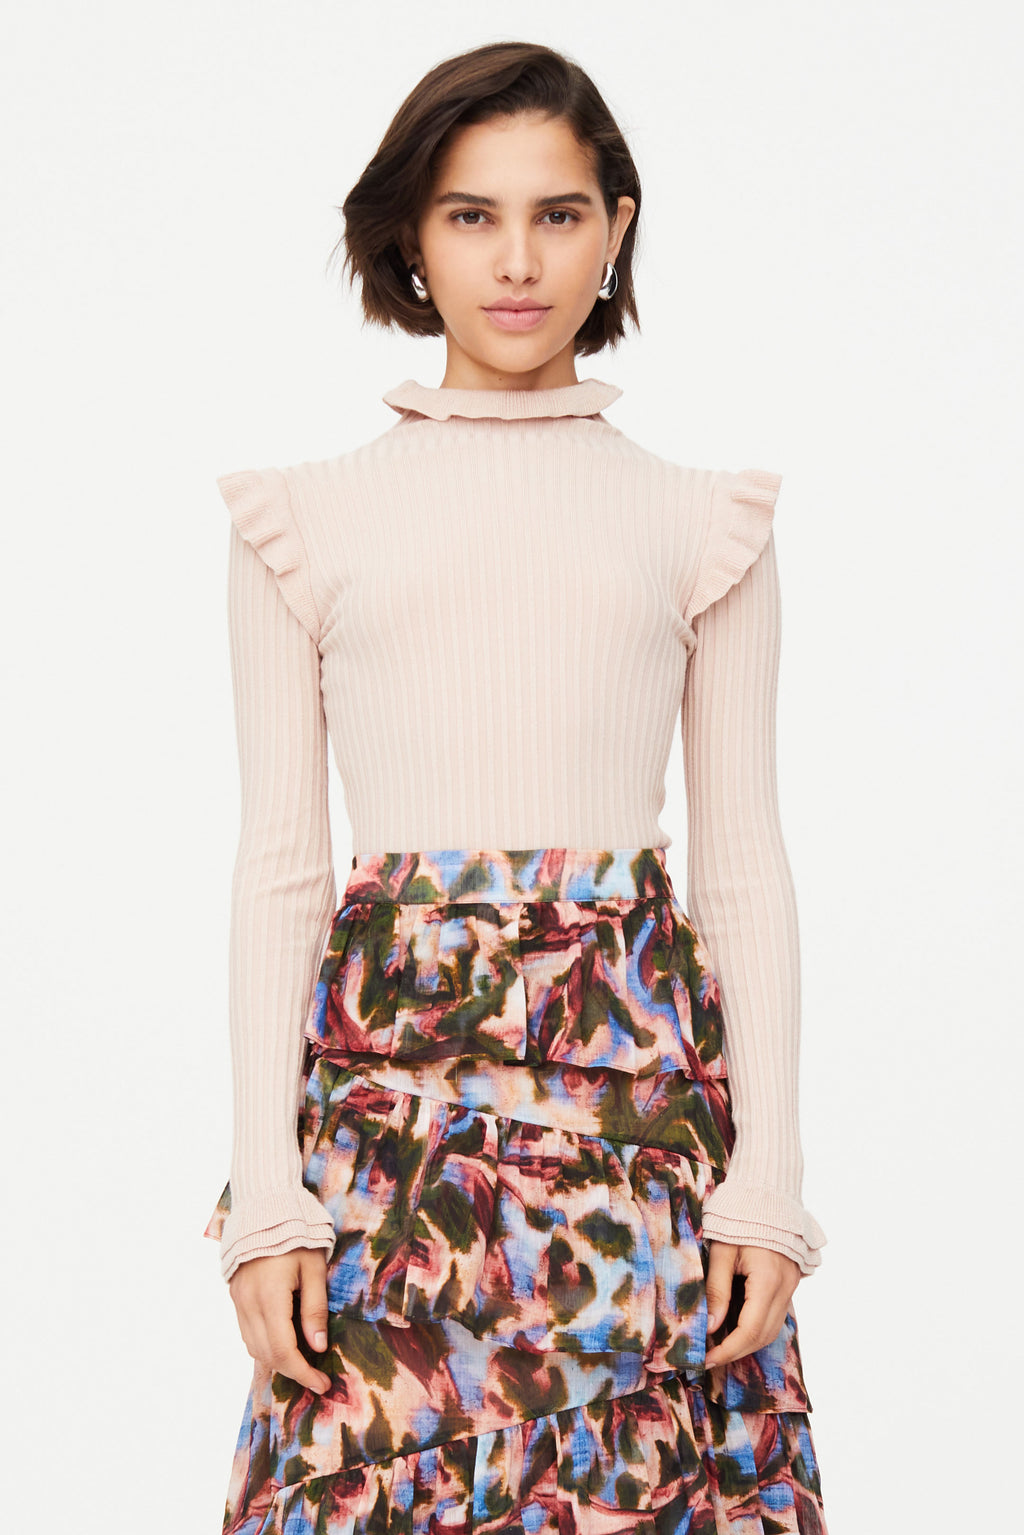 Pink turtleneck with ruffle details on shoulders and neck